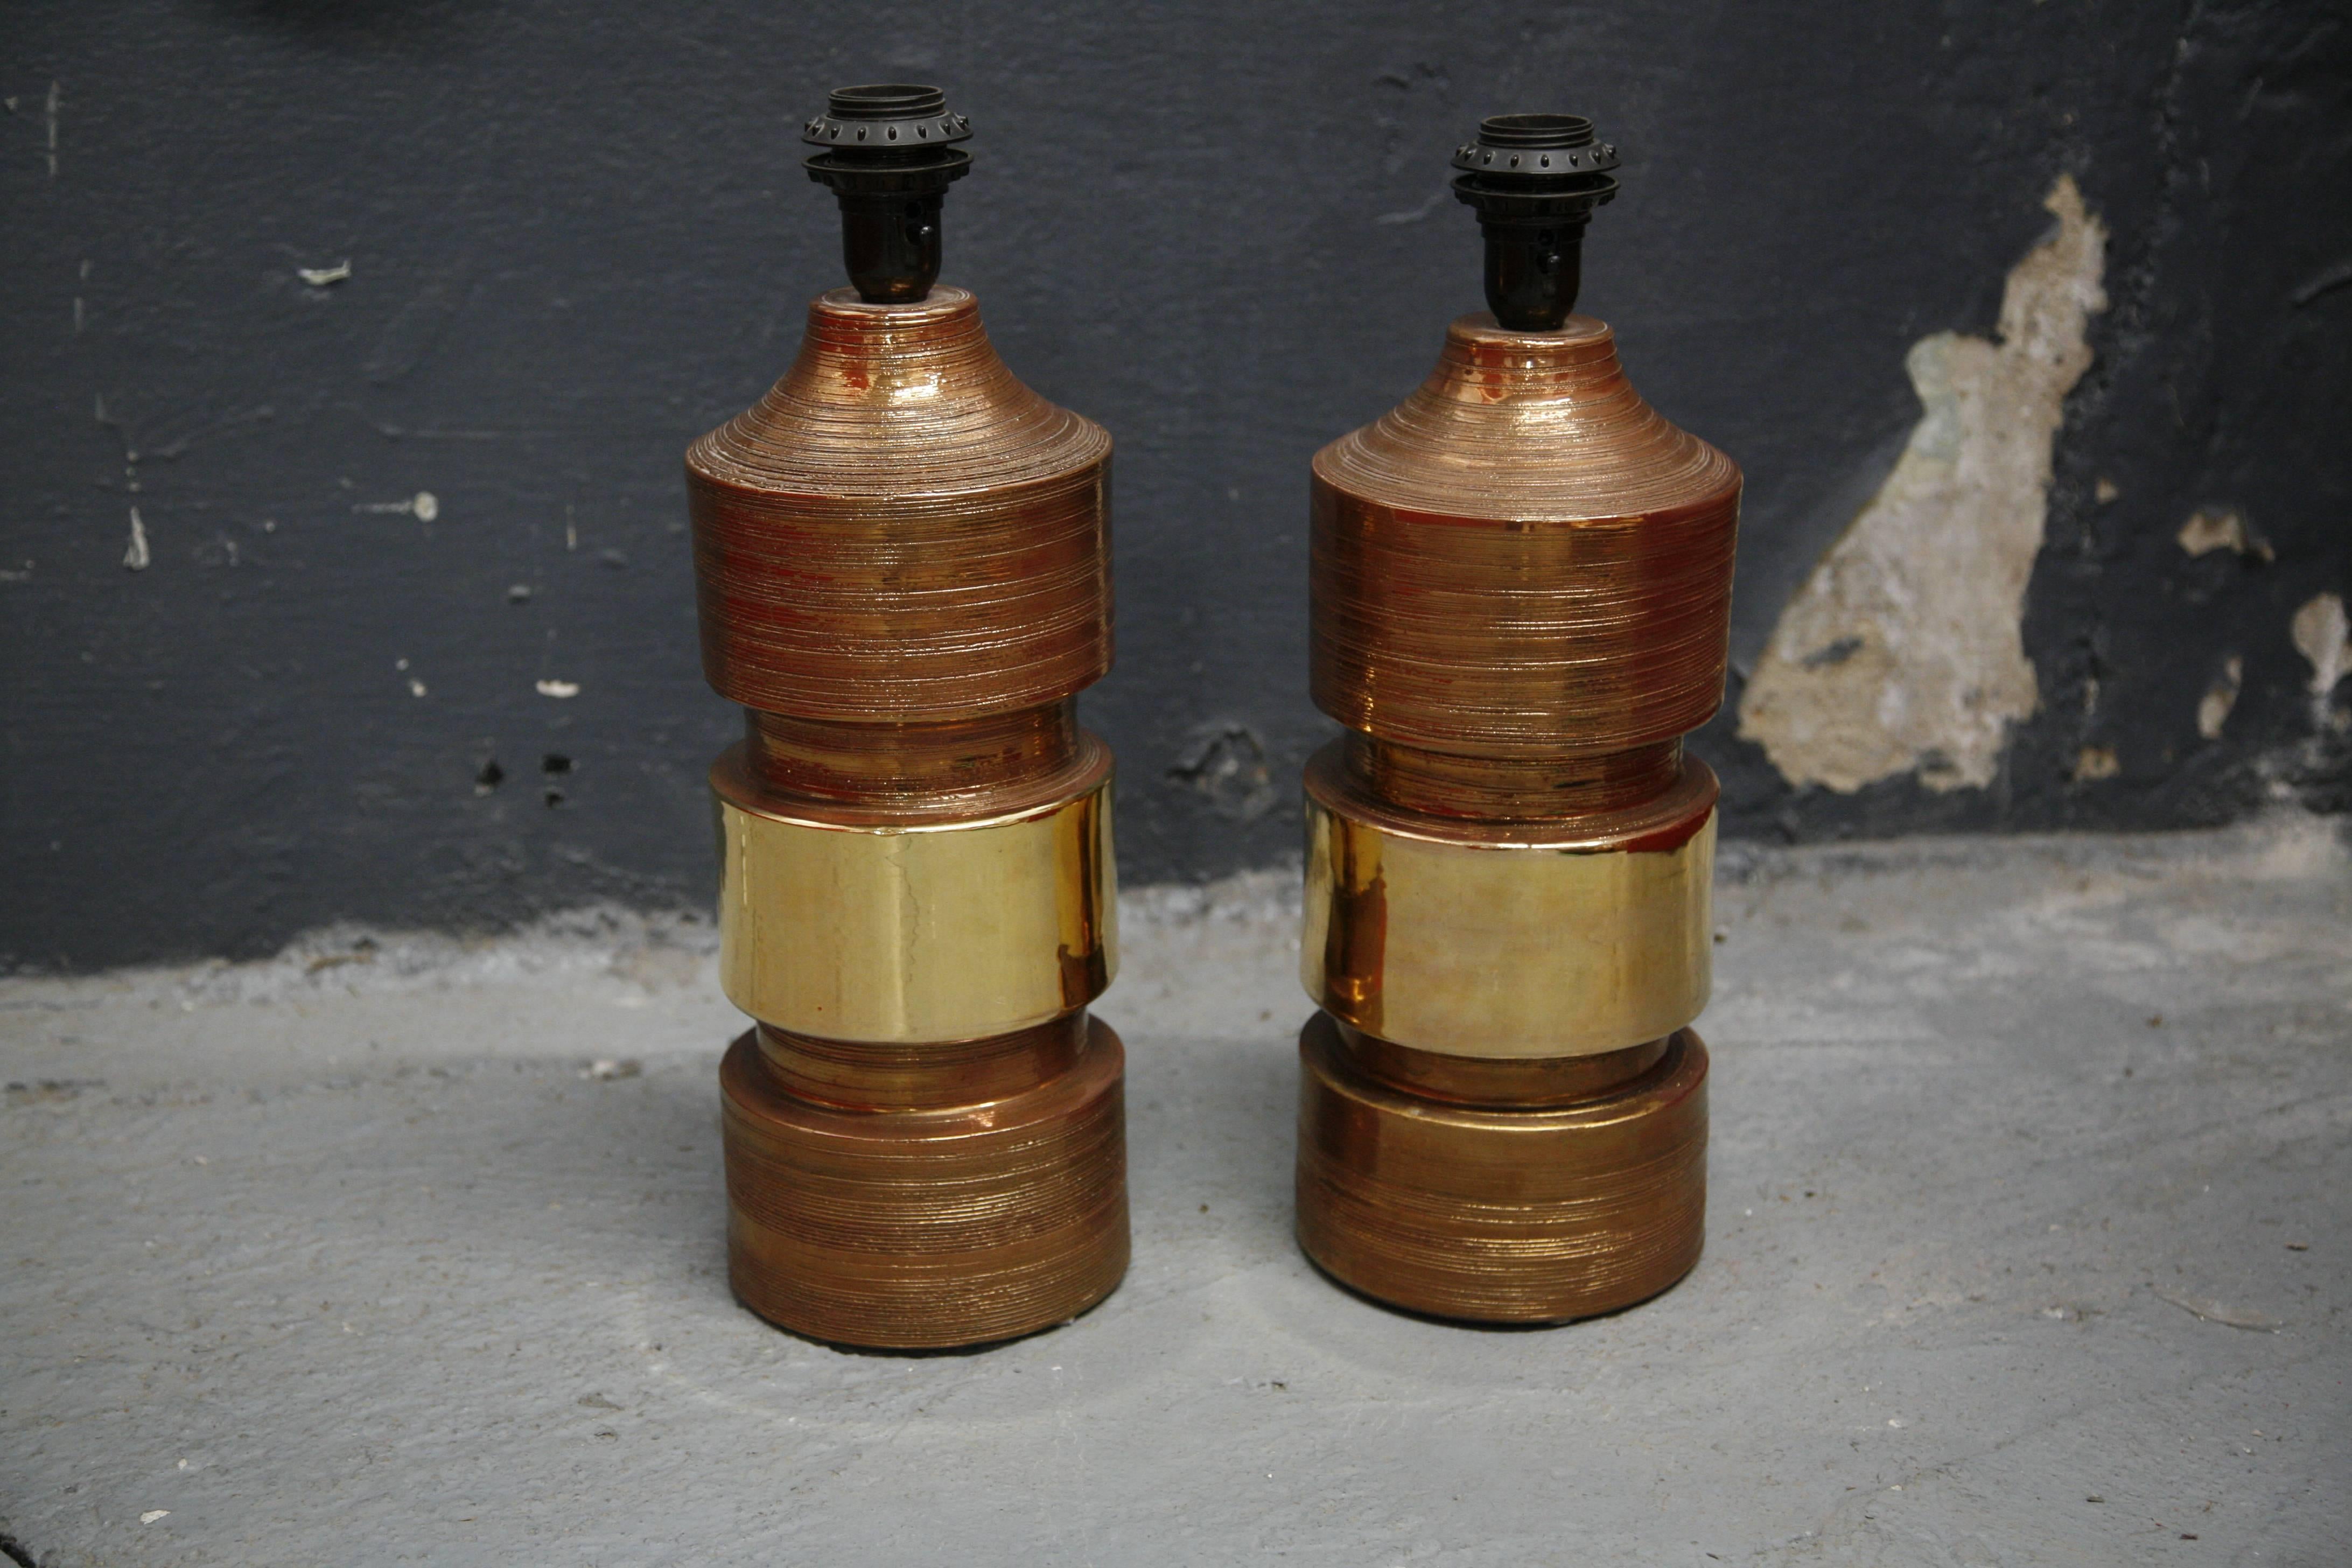 Bitossi lamps Italy 1970 ceramic copper and gold glaze by Bitossi has stickers from Bergboms as they were sold by Bergboms, Sweden.
Very strong powerful bodies with such elegant glaze sort of a matte finish except from the gold stripe in the middle